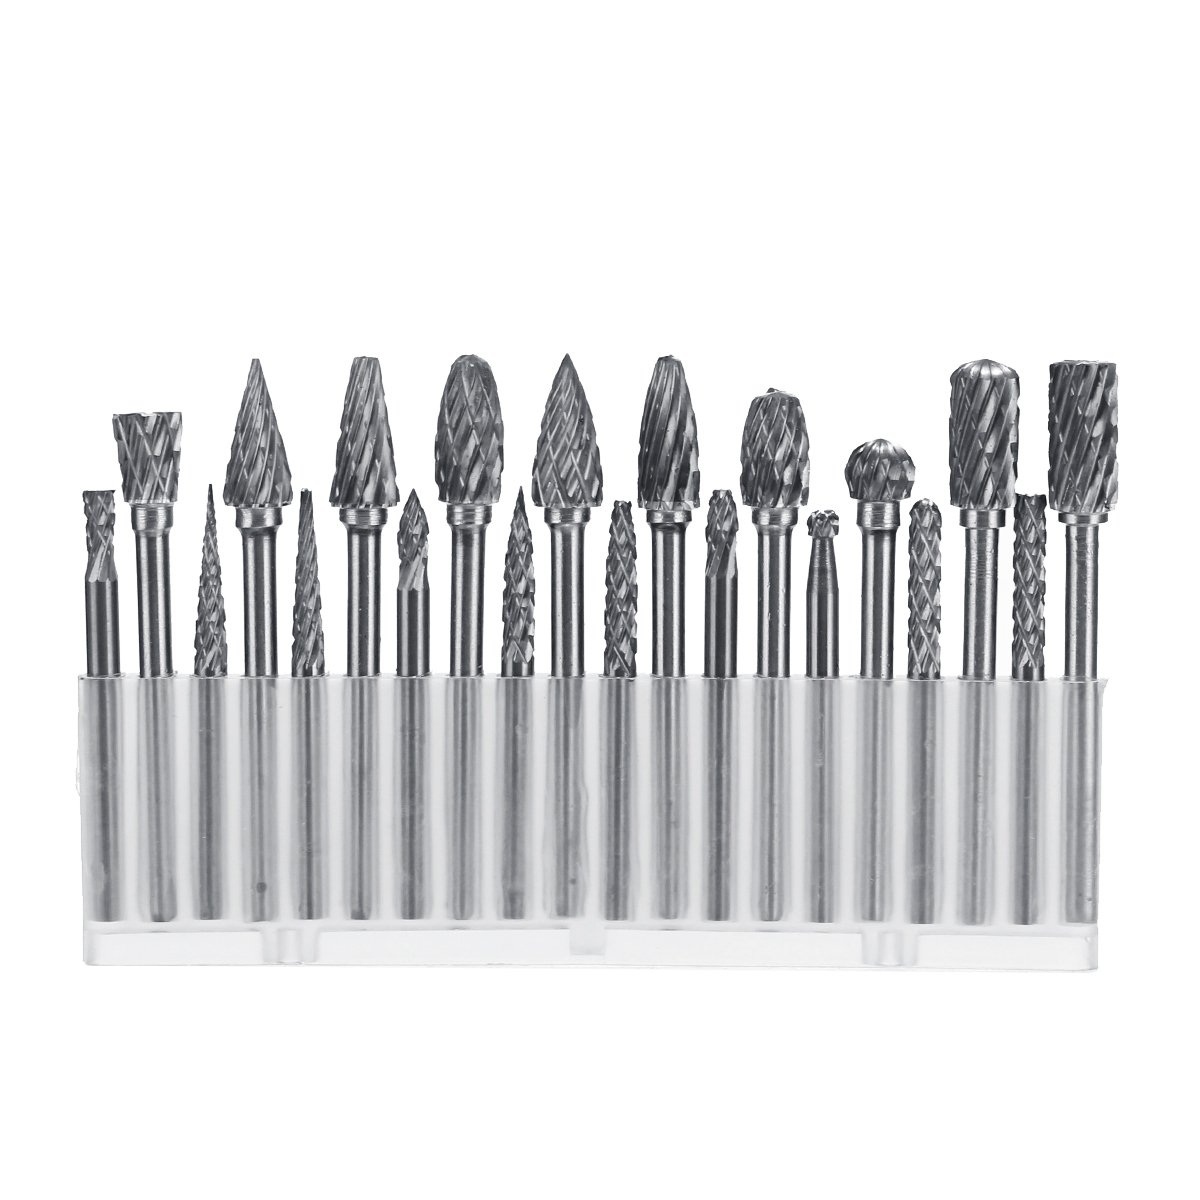 

20pcs Solid Carbide Rotary Burrs Drill Bit Tungsten Steel Double Cut Grinder Shank Rotary File